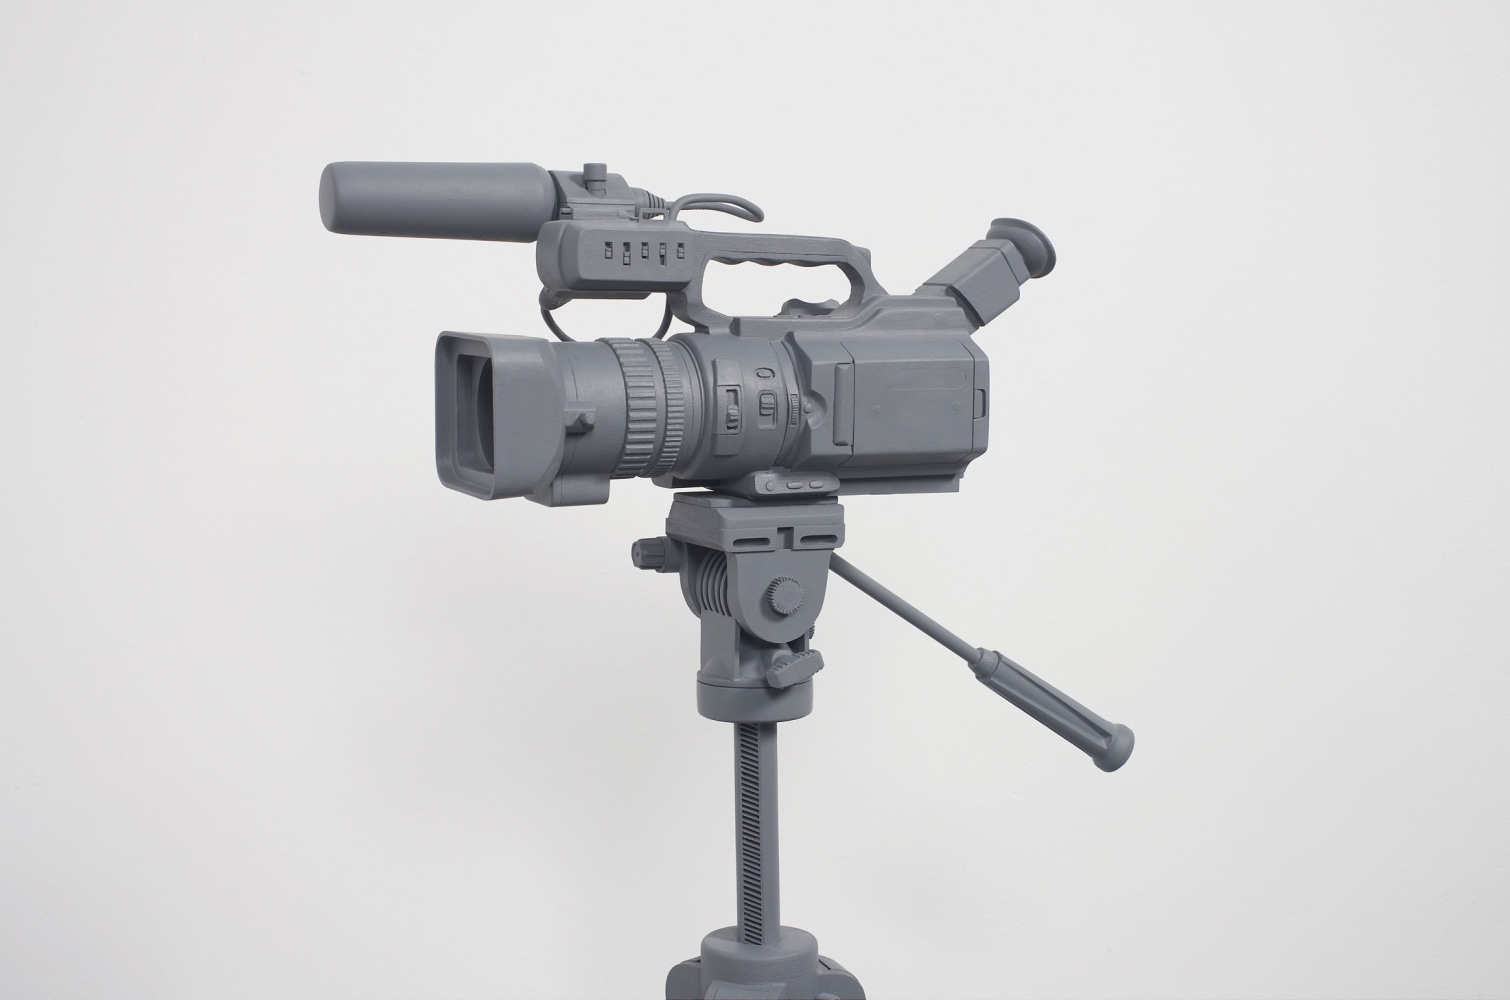 Tom Friedman

Untitled (video camera), 2012
Wood and paint
63 1/2 x 44 1/2 x 44 1/2 inches
(161.29 x 113.03 x 113.03 cm)